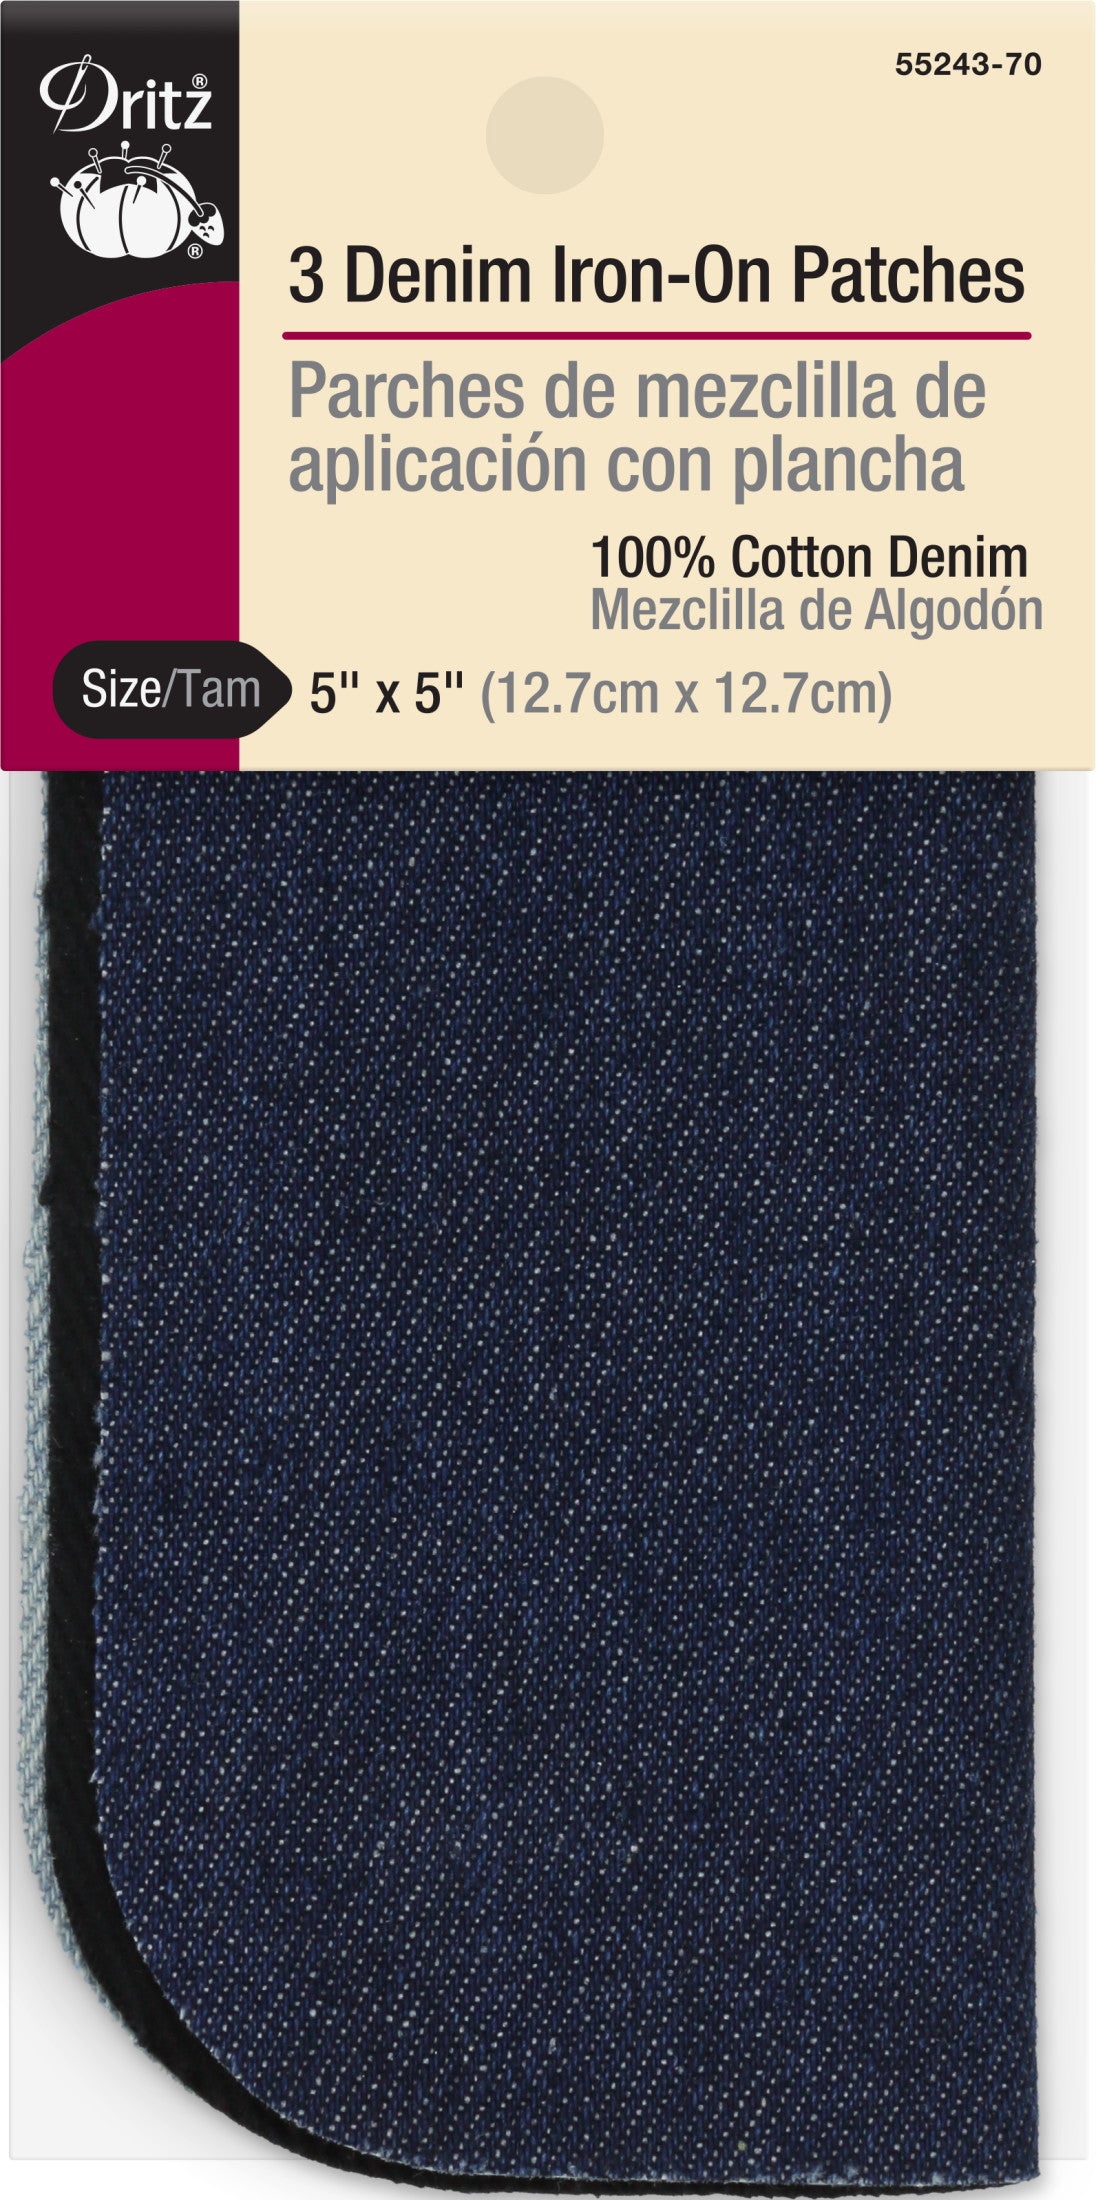 Dritz Denim Iron-On Patches, 5 inch x 5 inch, Assorted, 3 pc